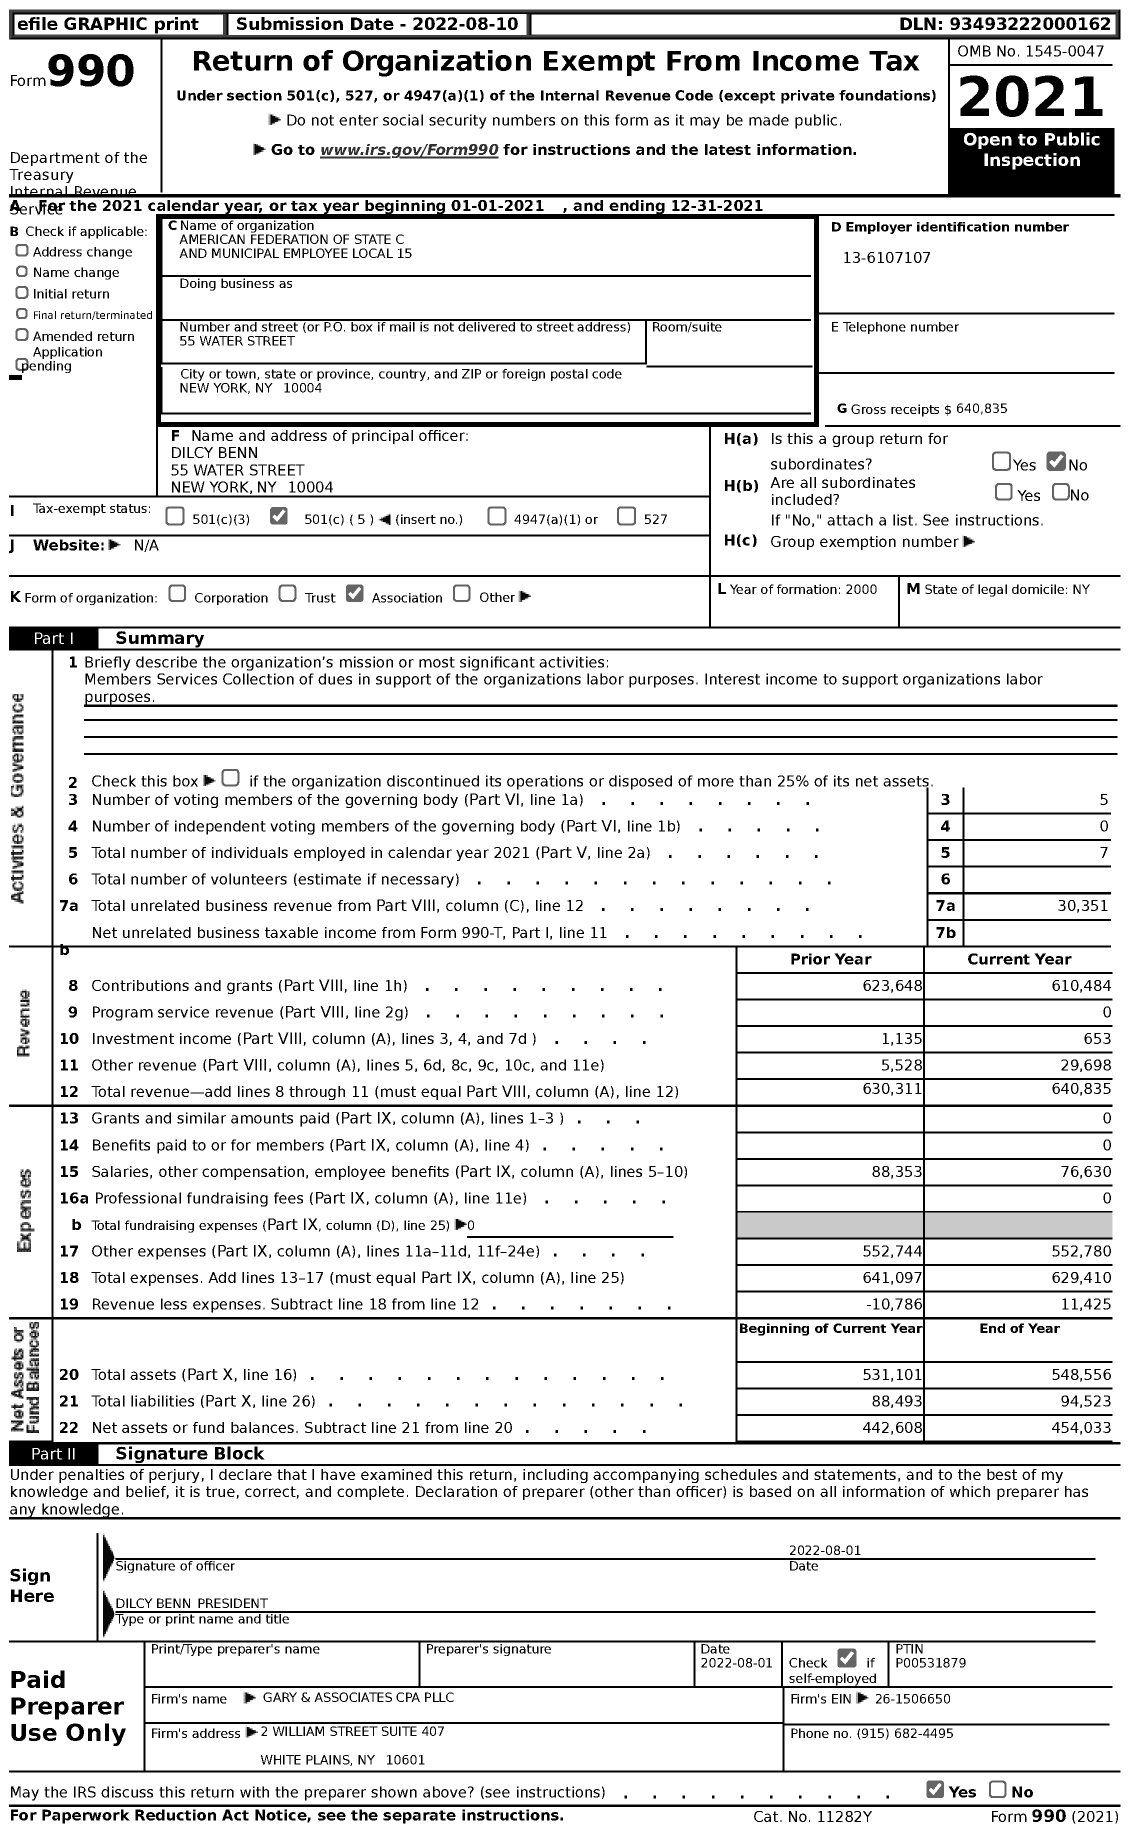 Image of first page of 2021 Form 990 for American Federation of State County & Municipal Employees - L1505ny Ny Att Debris PK SVS WKRS